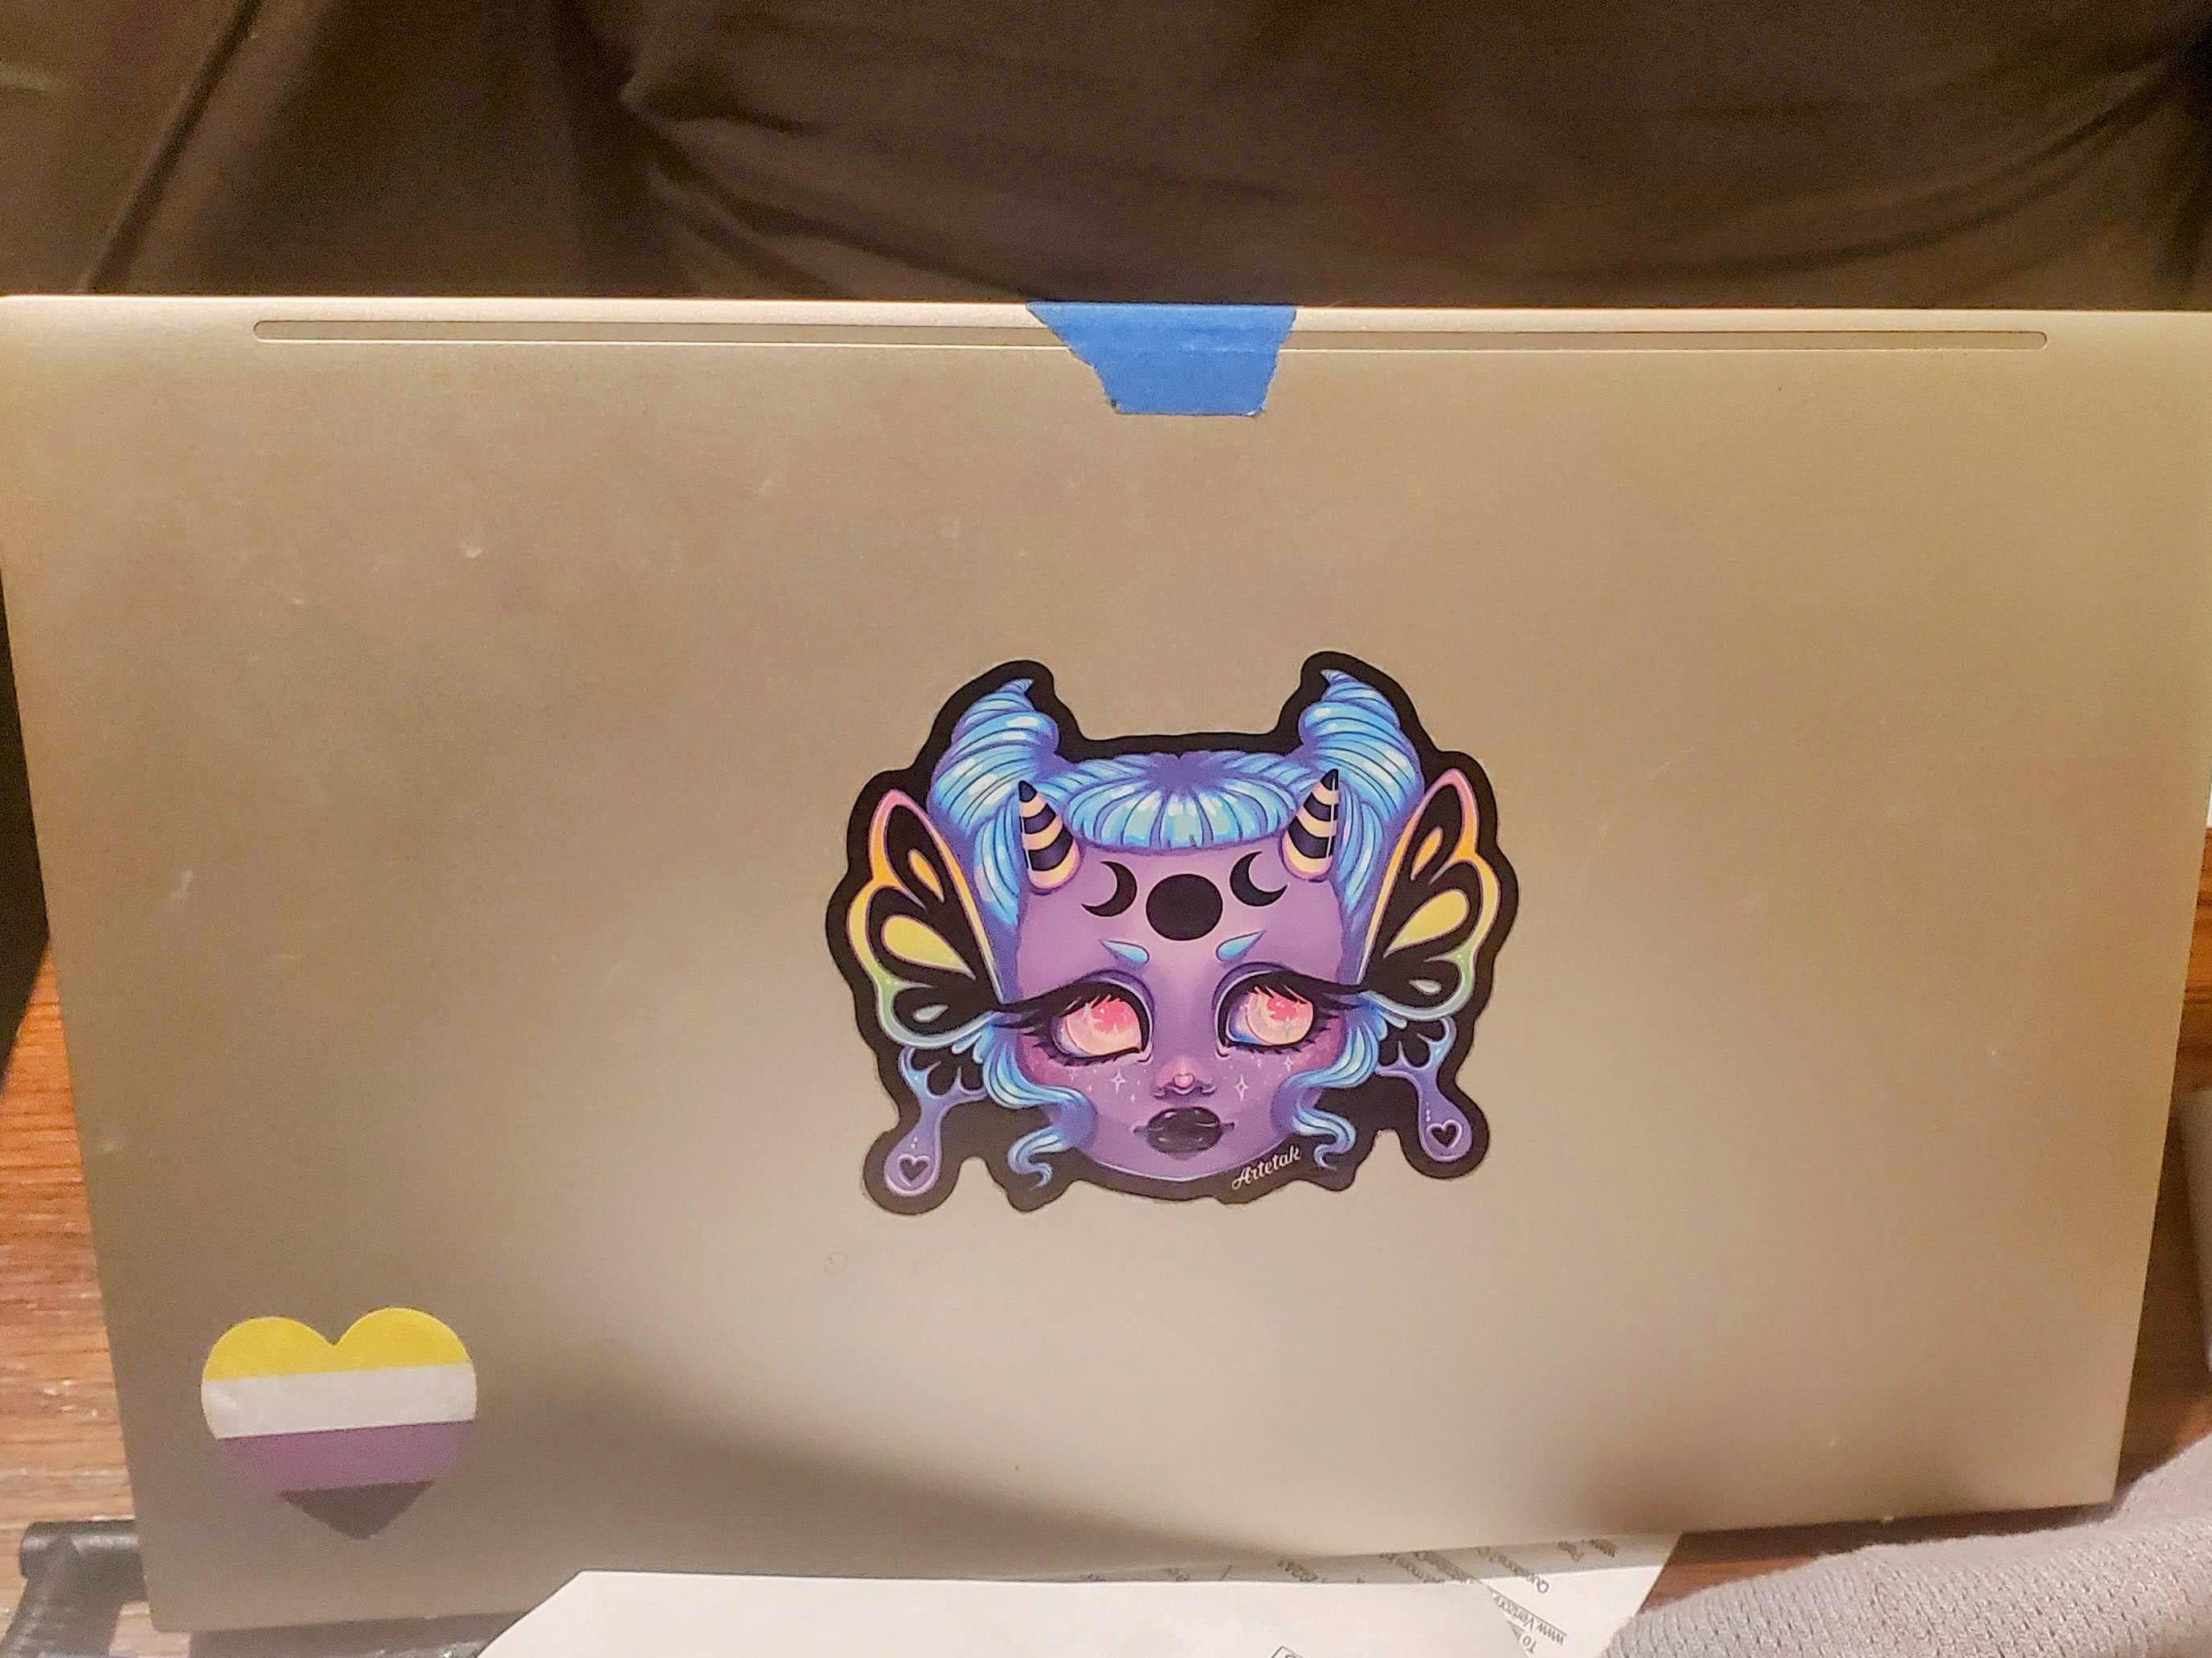 A silver laptop lid with an Artetak demon woman and a nonbinary heart sticker on it